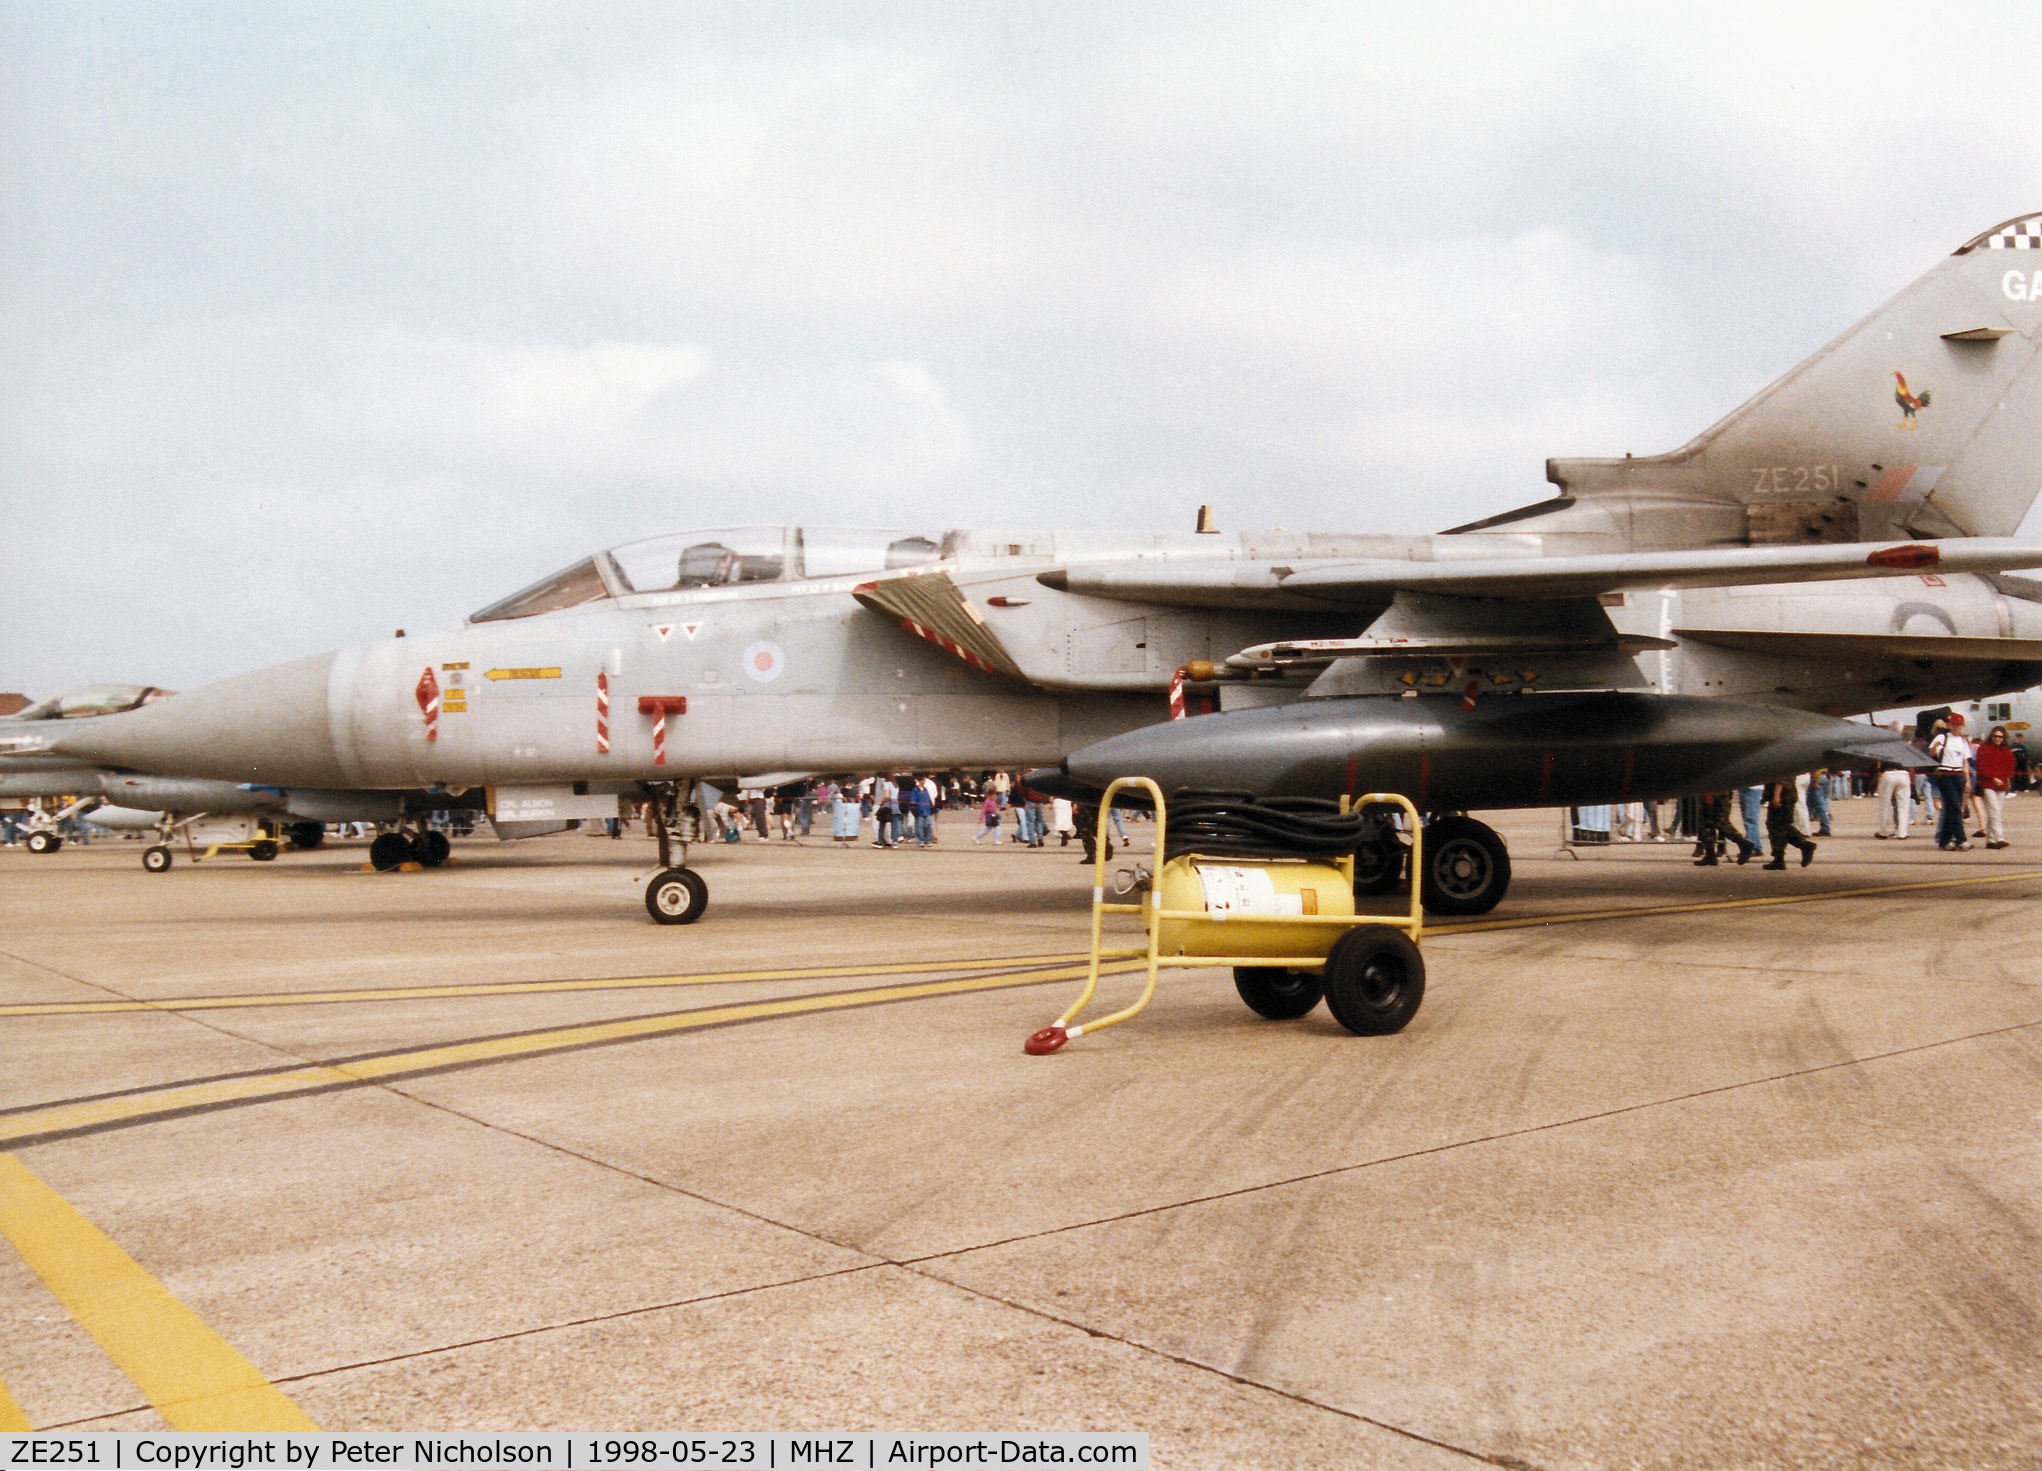 ZE251, 1987 Panavia Tornado F.3 C/N AS029/593/3265, Another view of the Tornado F.3 of 43 Squadron at RAF Leuchars on display at the 1998 RAF Mildenhall Air Fete.